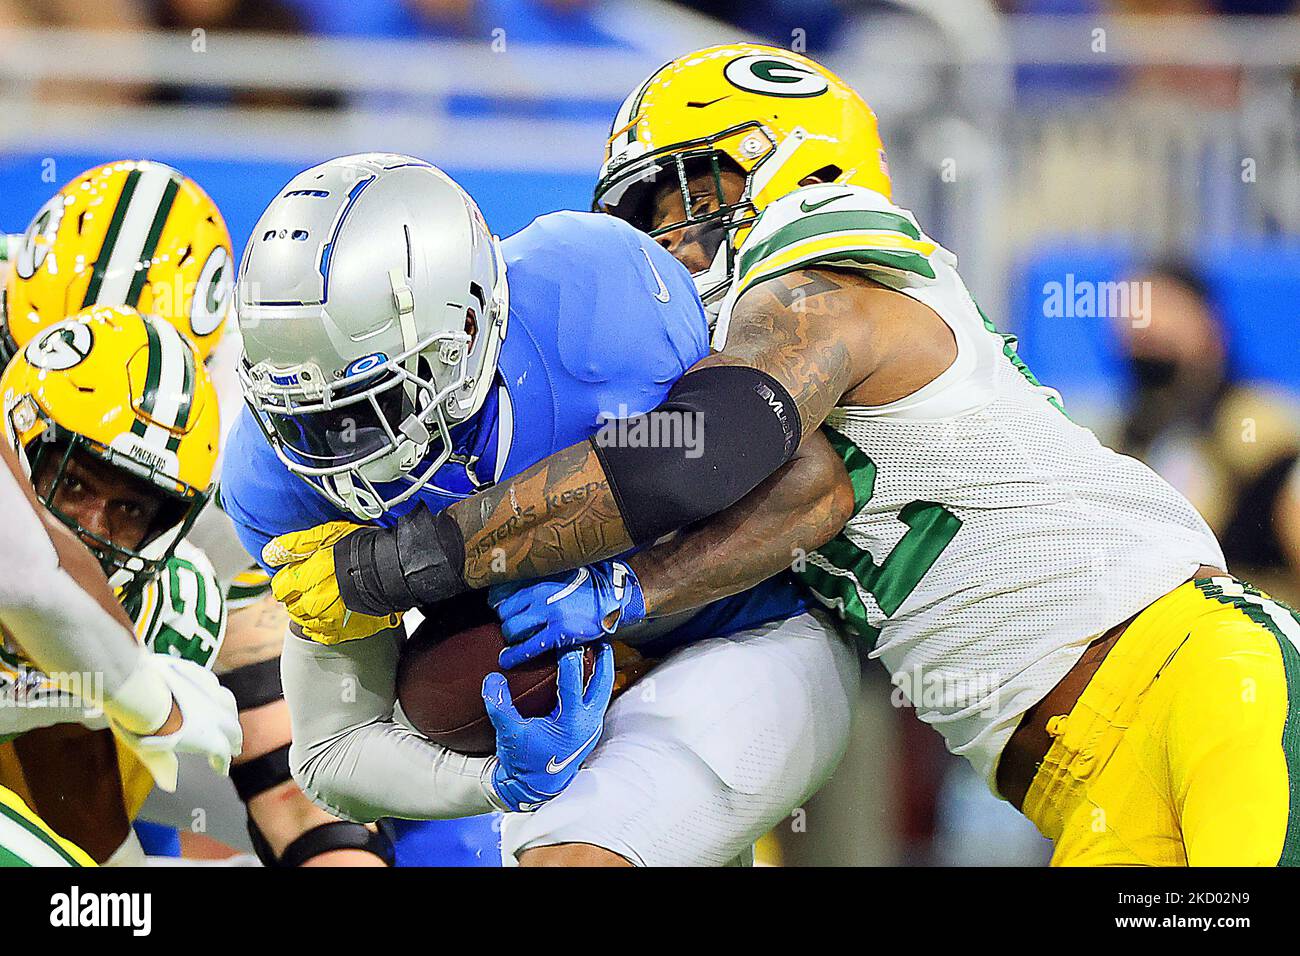 Detroit Lions running back D'Andre Swift (32) is tackled by Green Bay Packers outside linebacker Rashan Gary (52) during an NFL football game between the Detroit Lions and the Green Bay Packers in Detroit, Michigan USA, on Sunday, January 9, 2022. (Photo by Amy Lemus/NurPhoto) Stock Photo